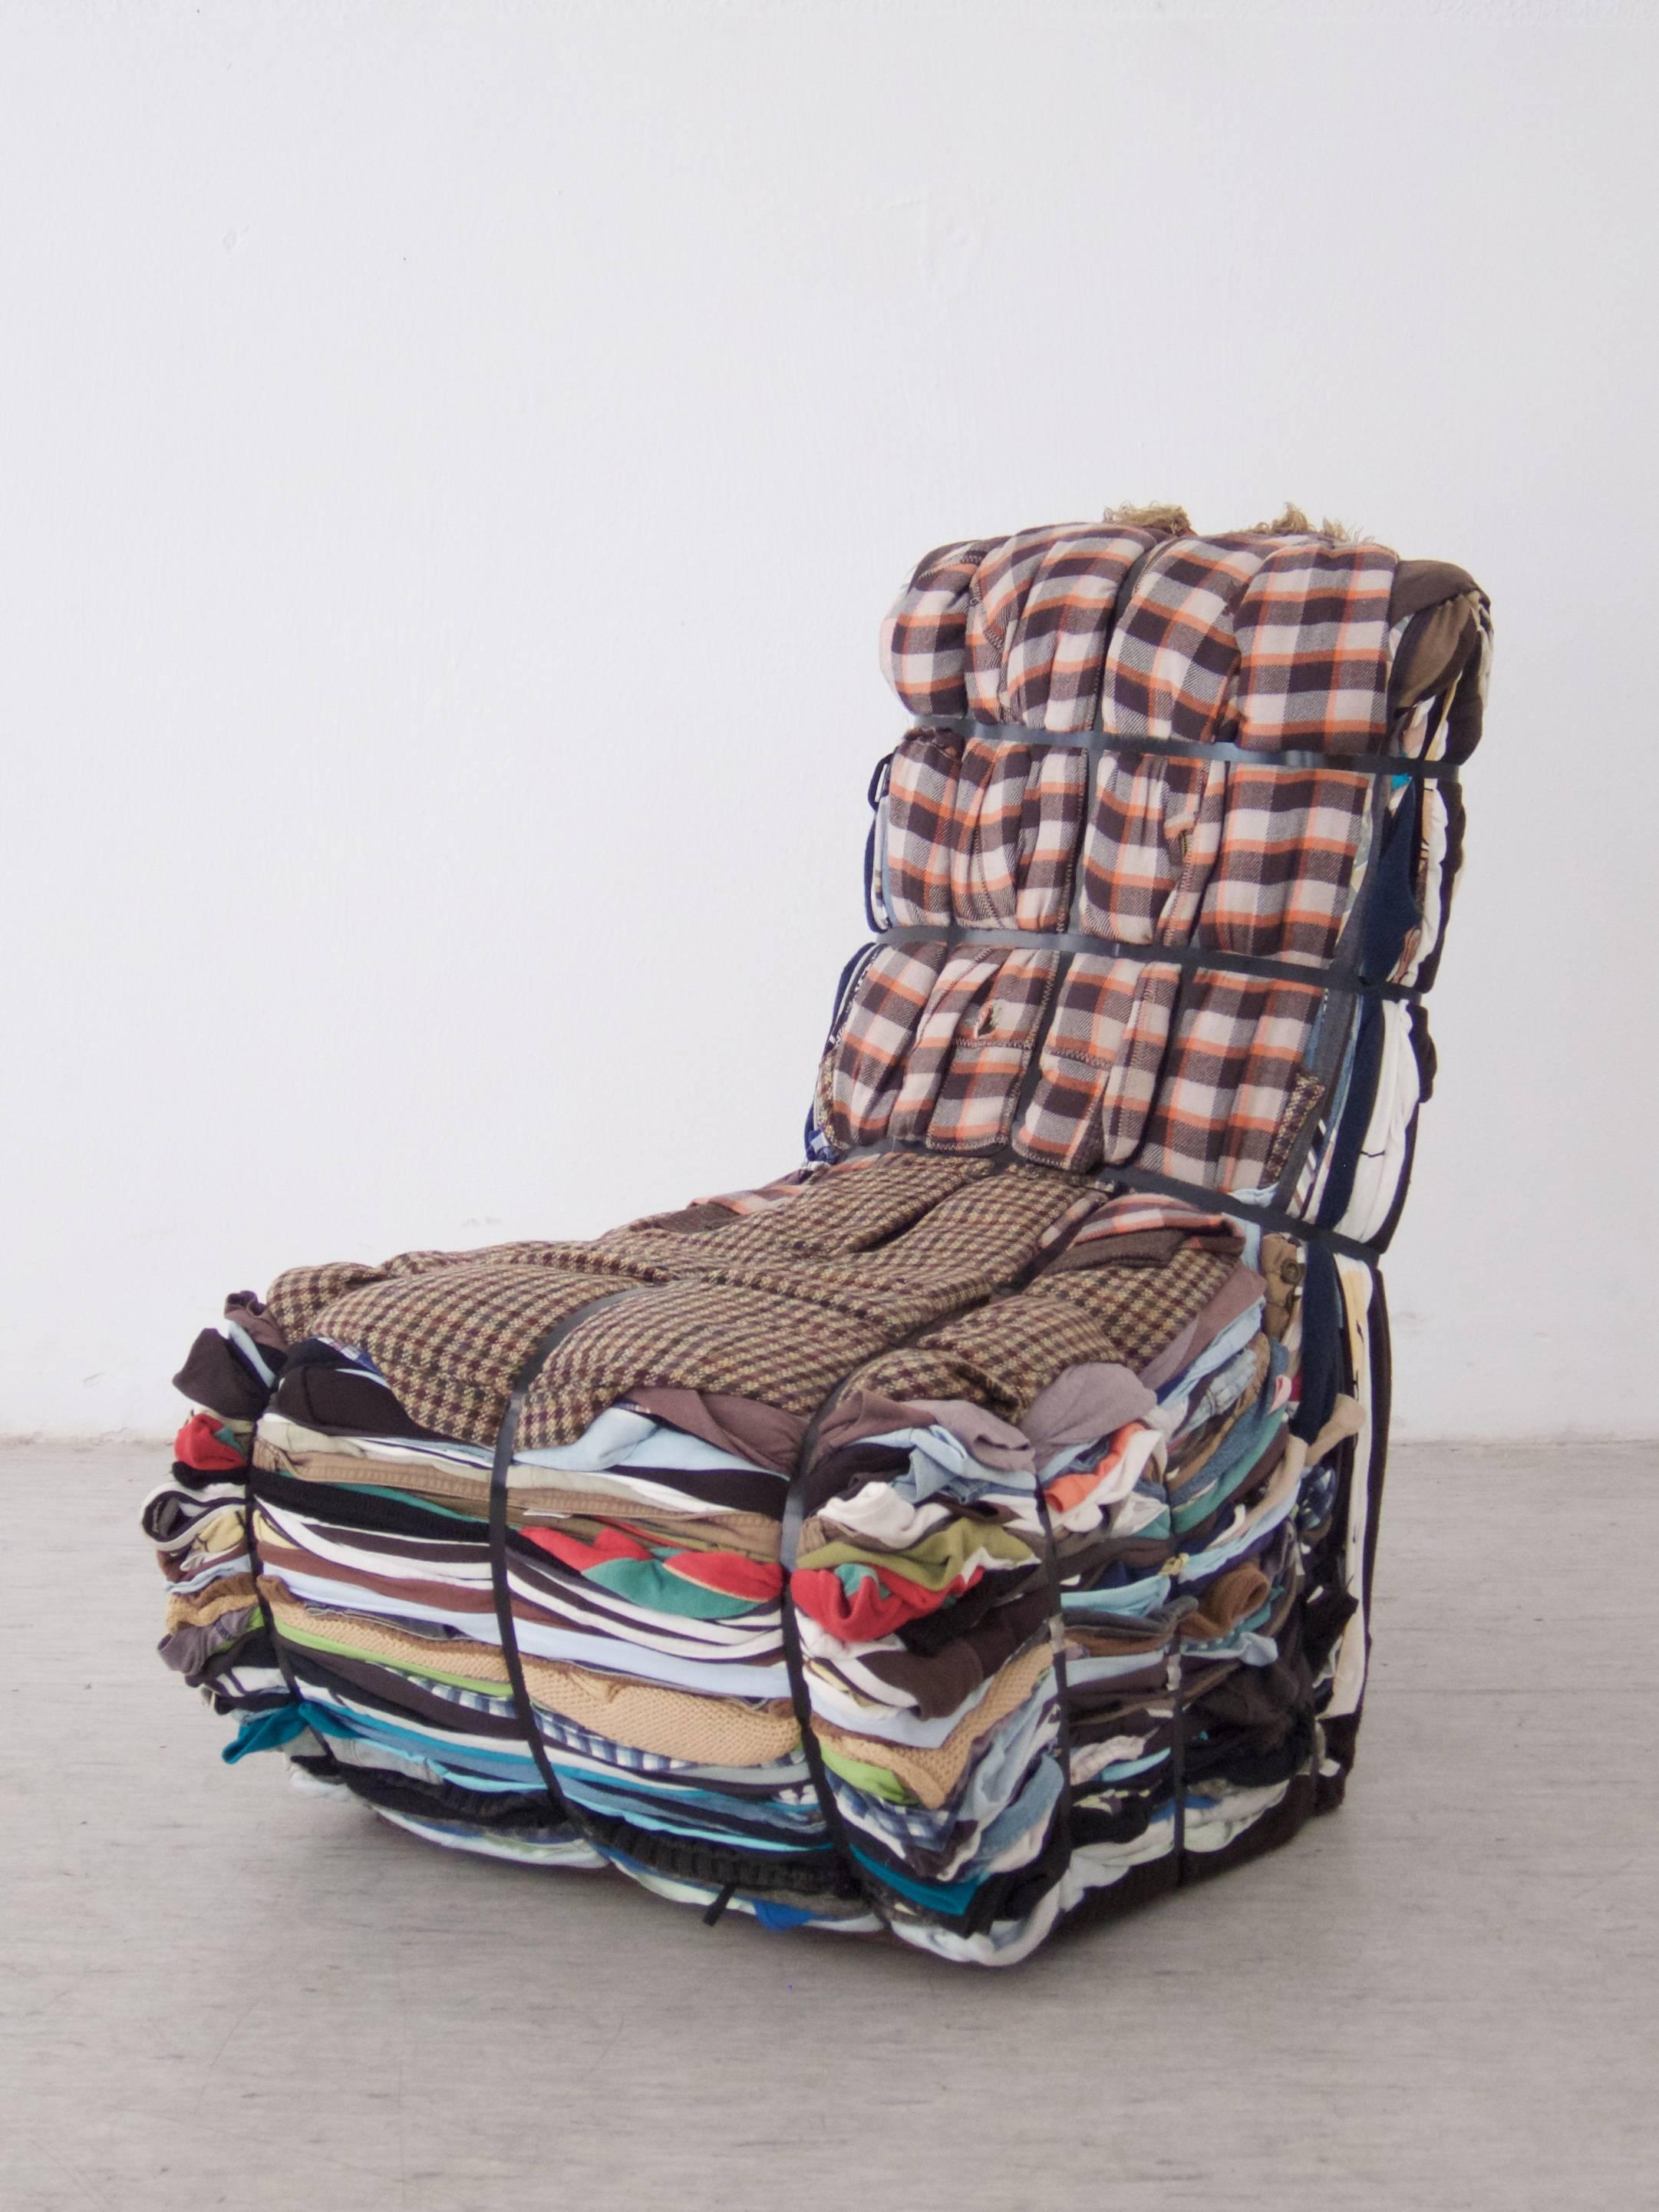 Rag chair 1991 by Tejo Remy for Droog
Made of around 50 kg rags strapped with blue steel packing straps.

Unique piece!